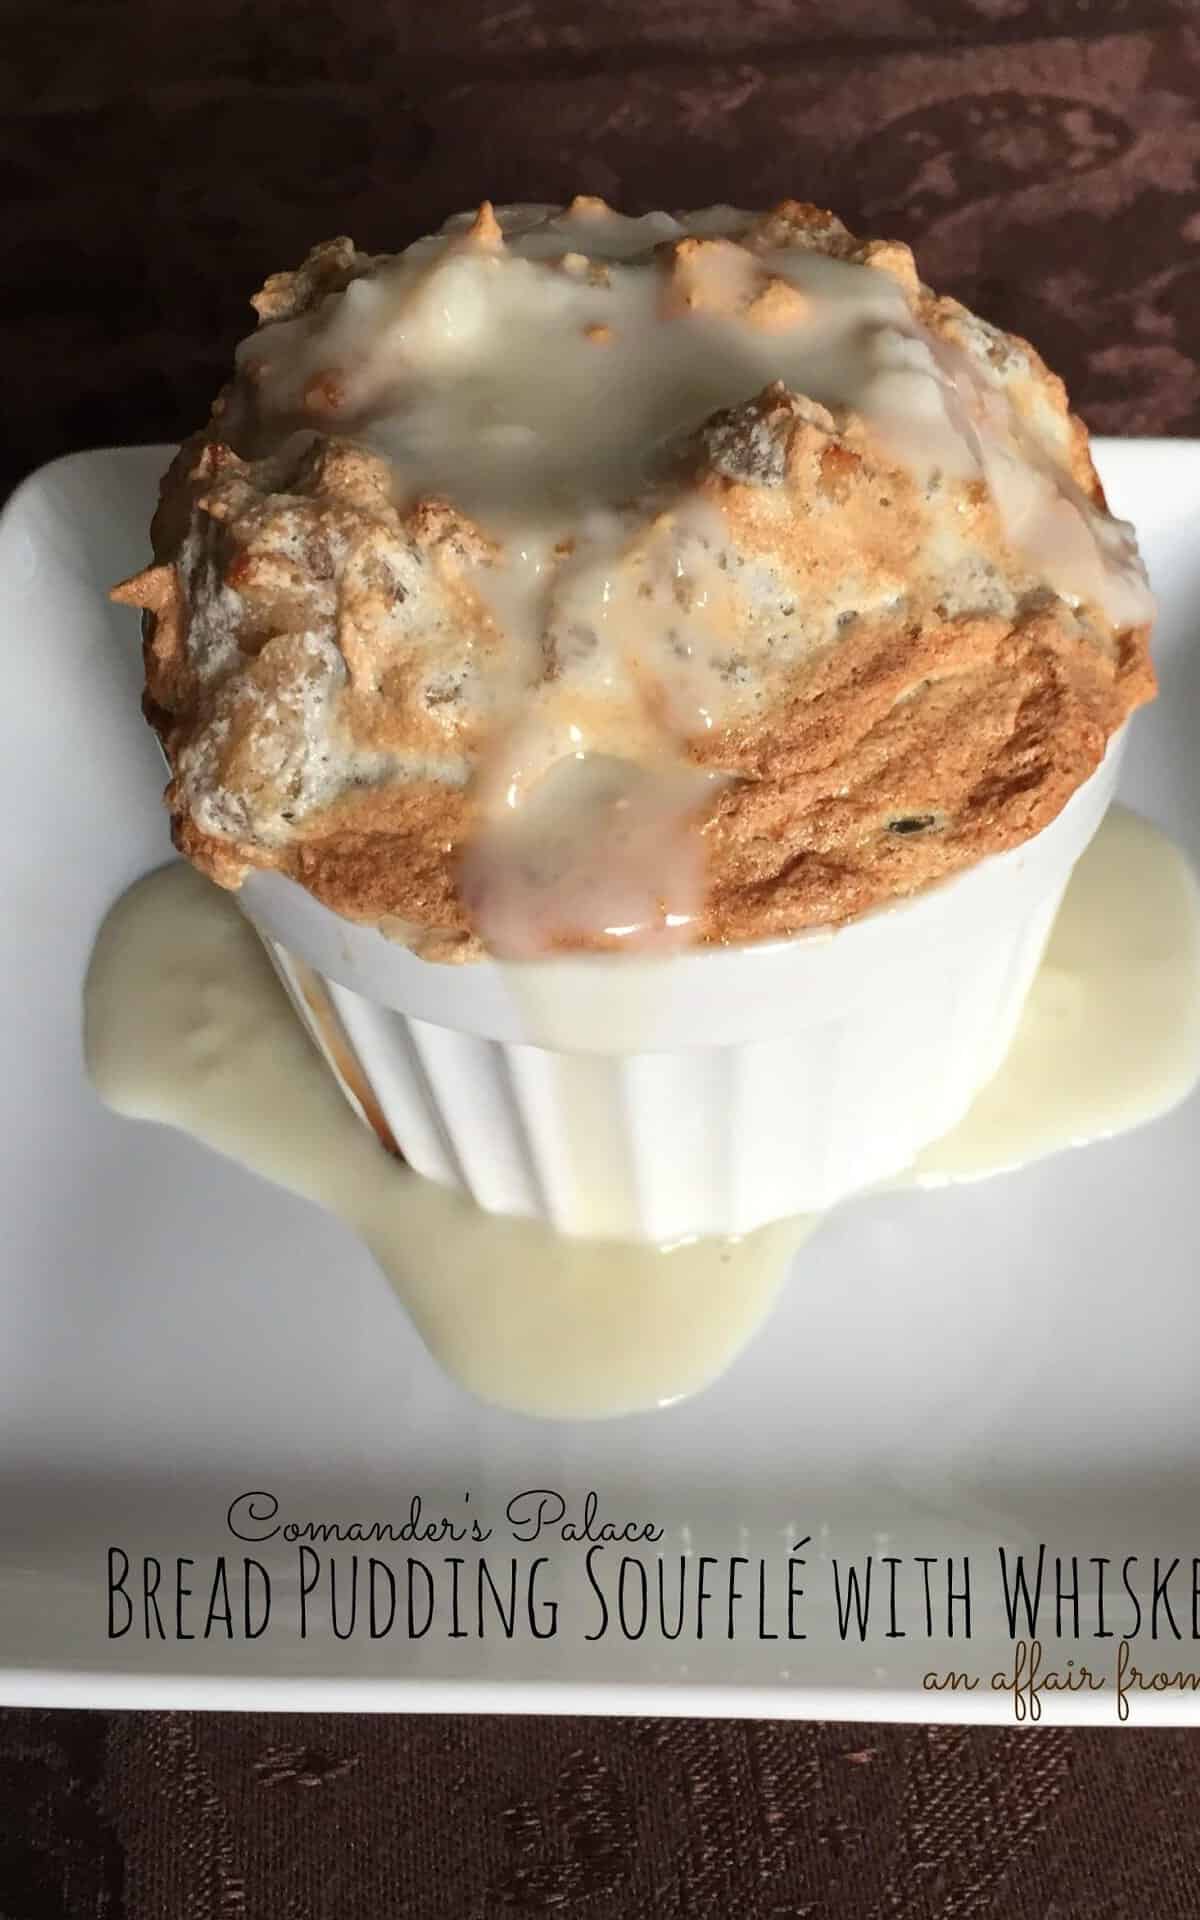 Delicious Bread Pudding Souffle with Whiskey Sauce Recipe